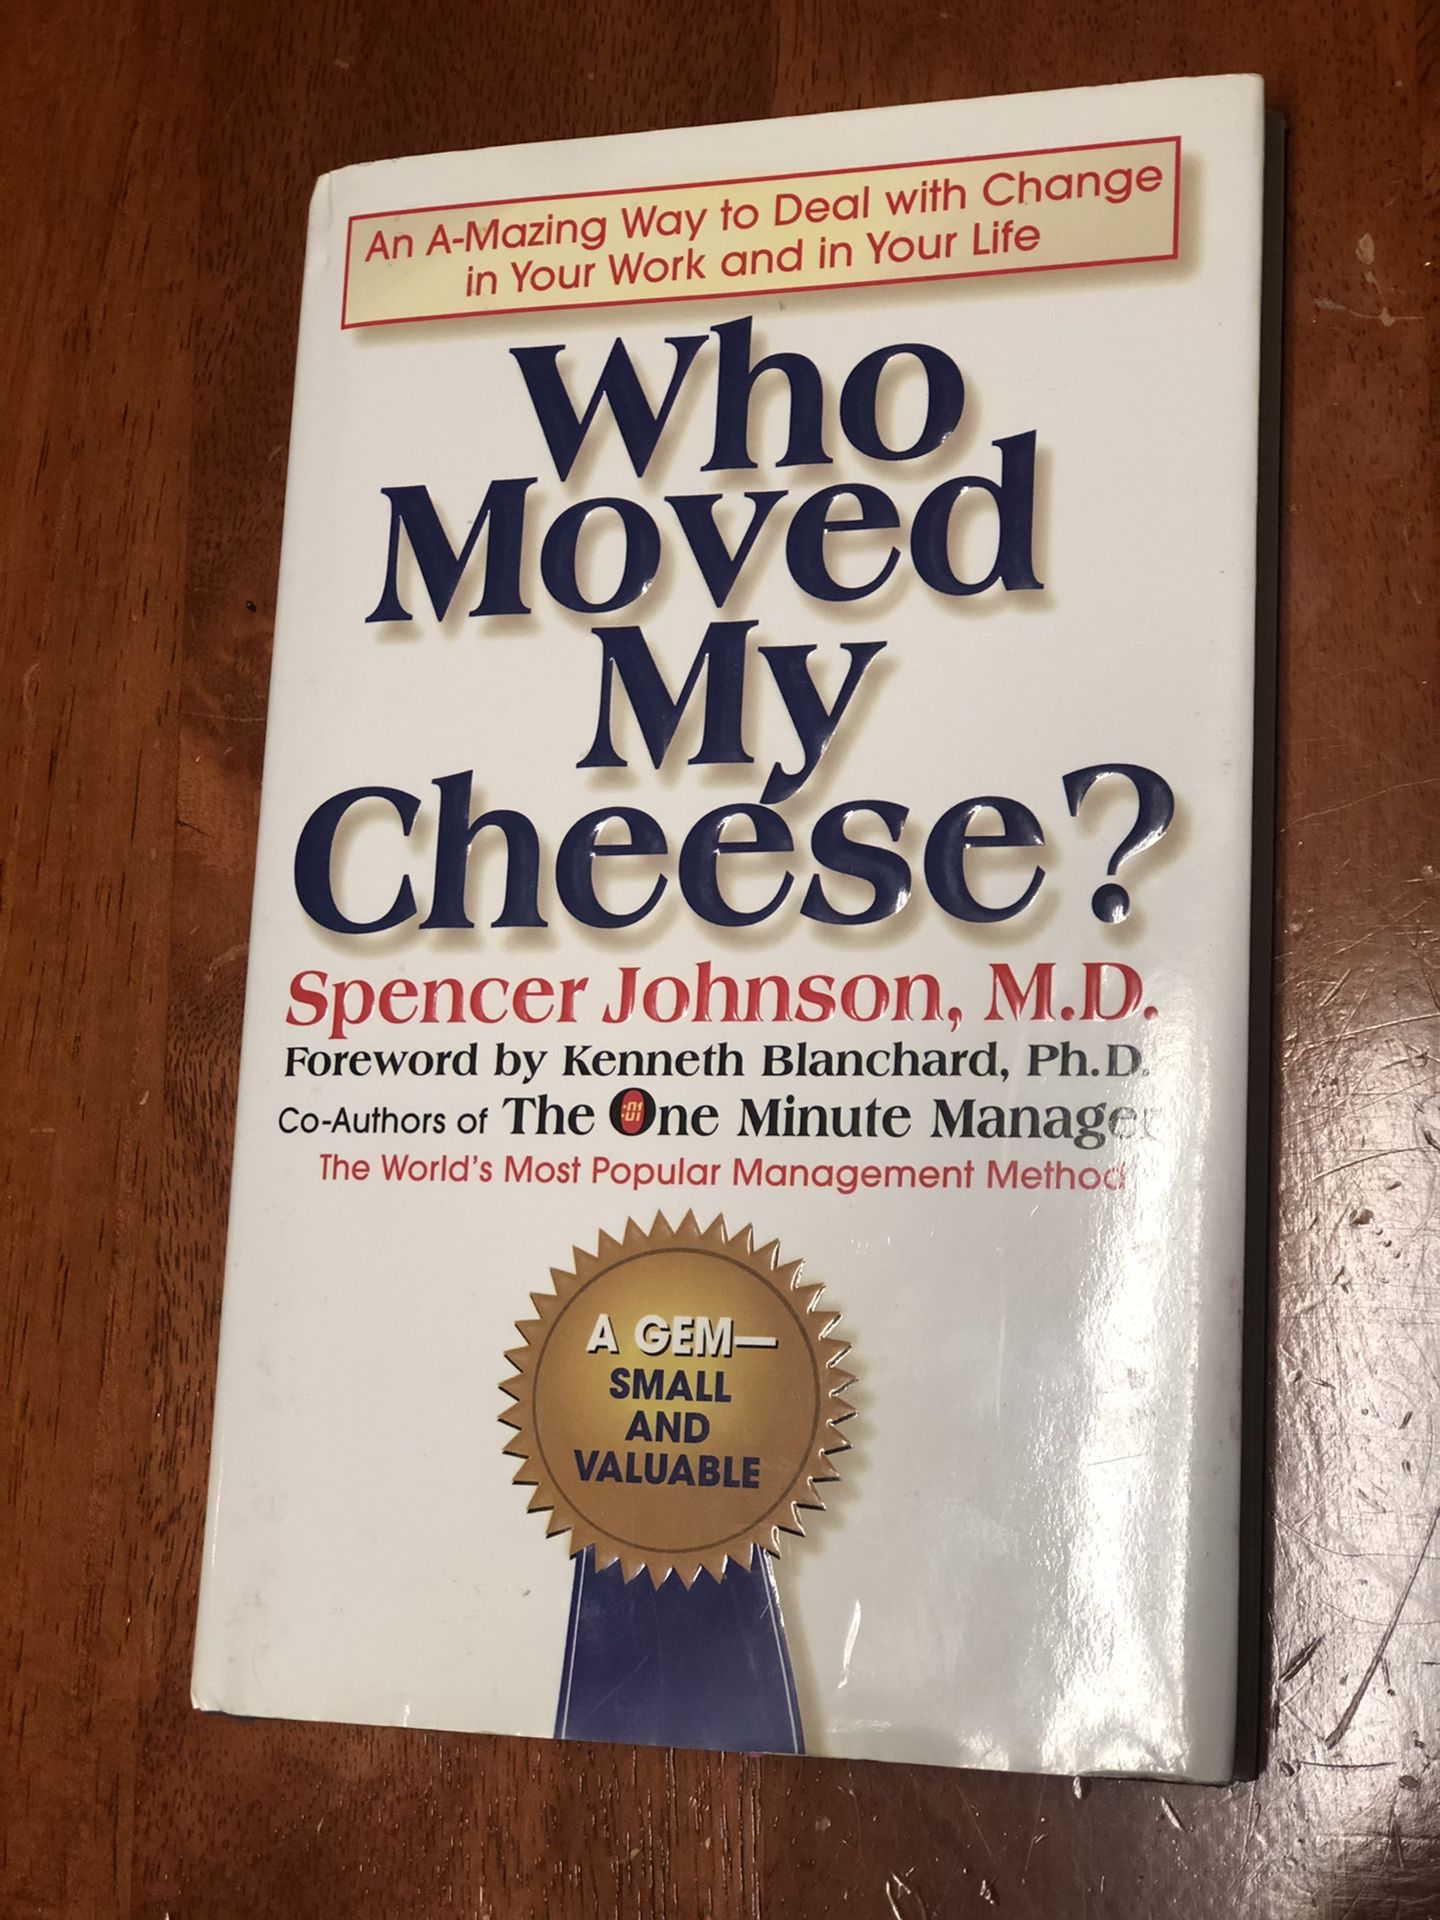 Who Moved My Cheese? Spencer Johnson, M.D.